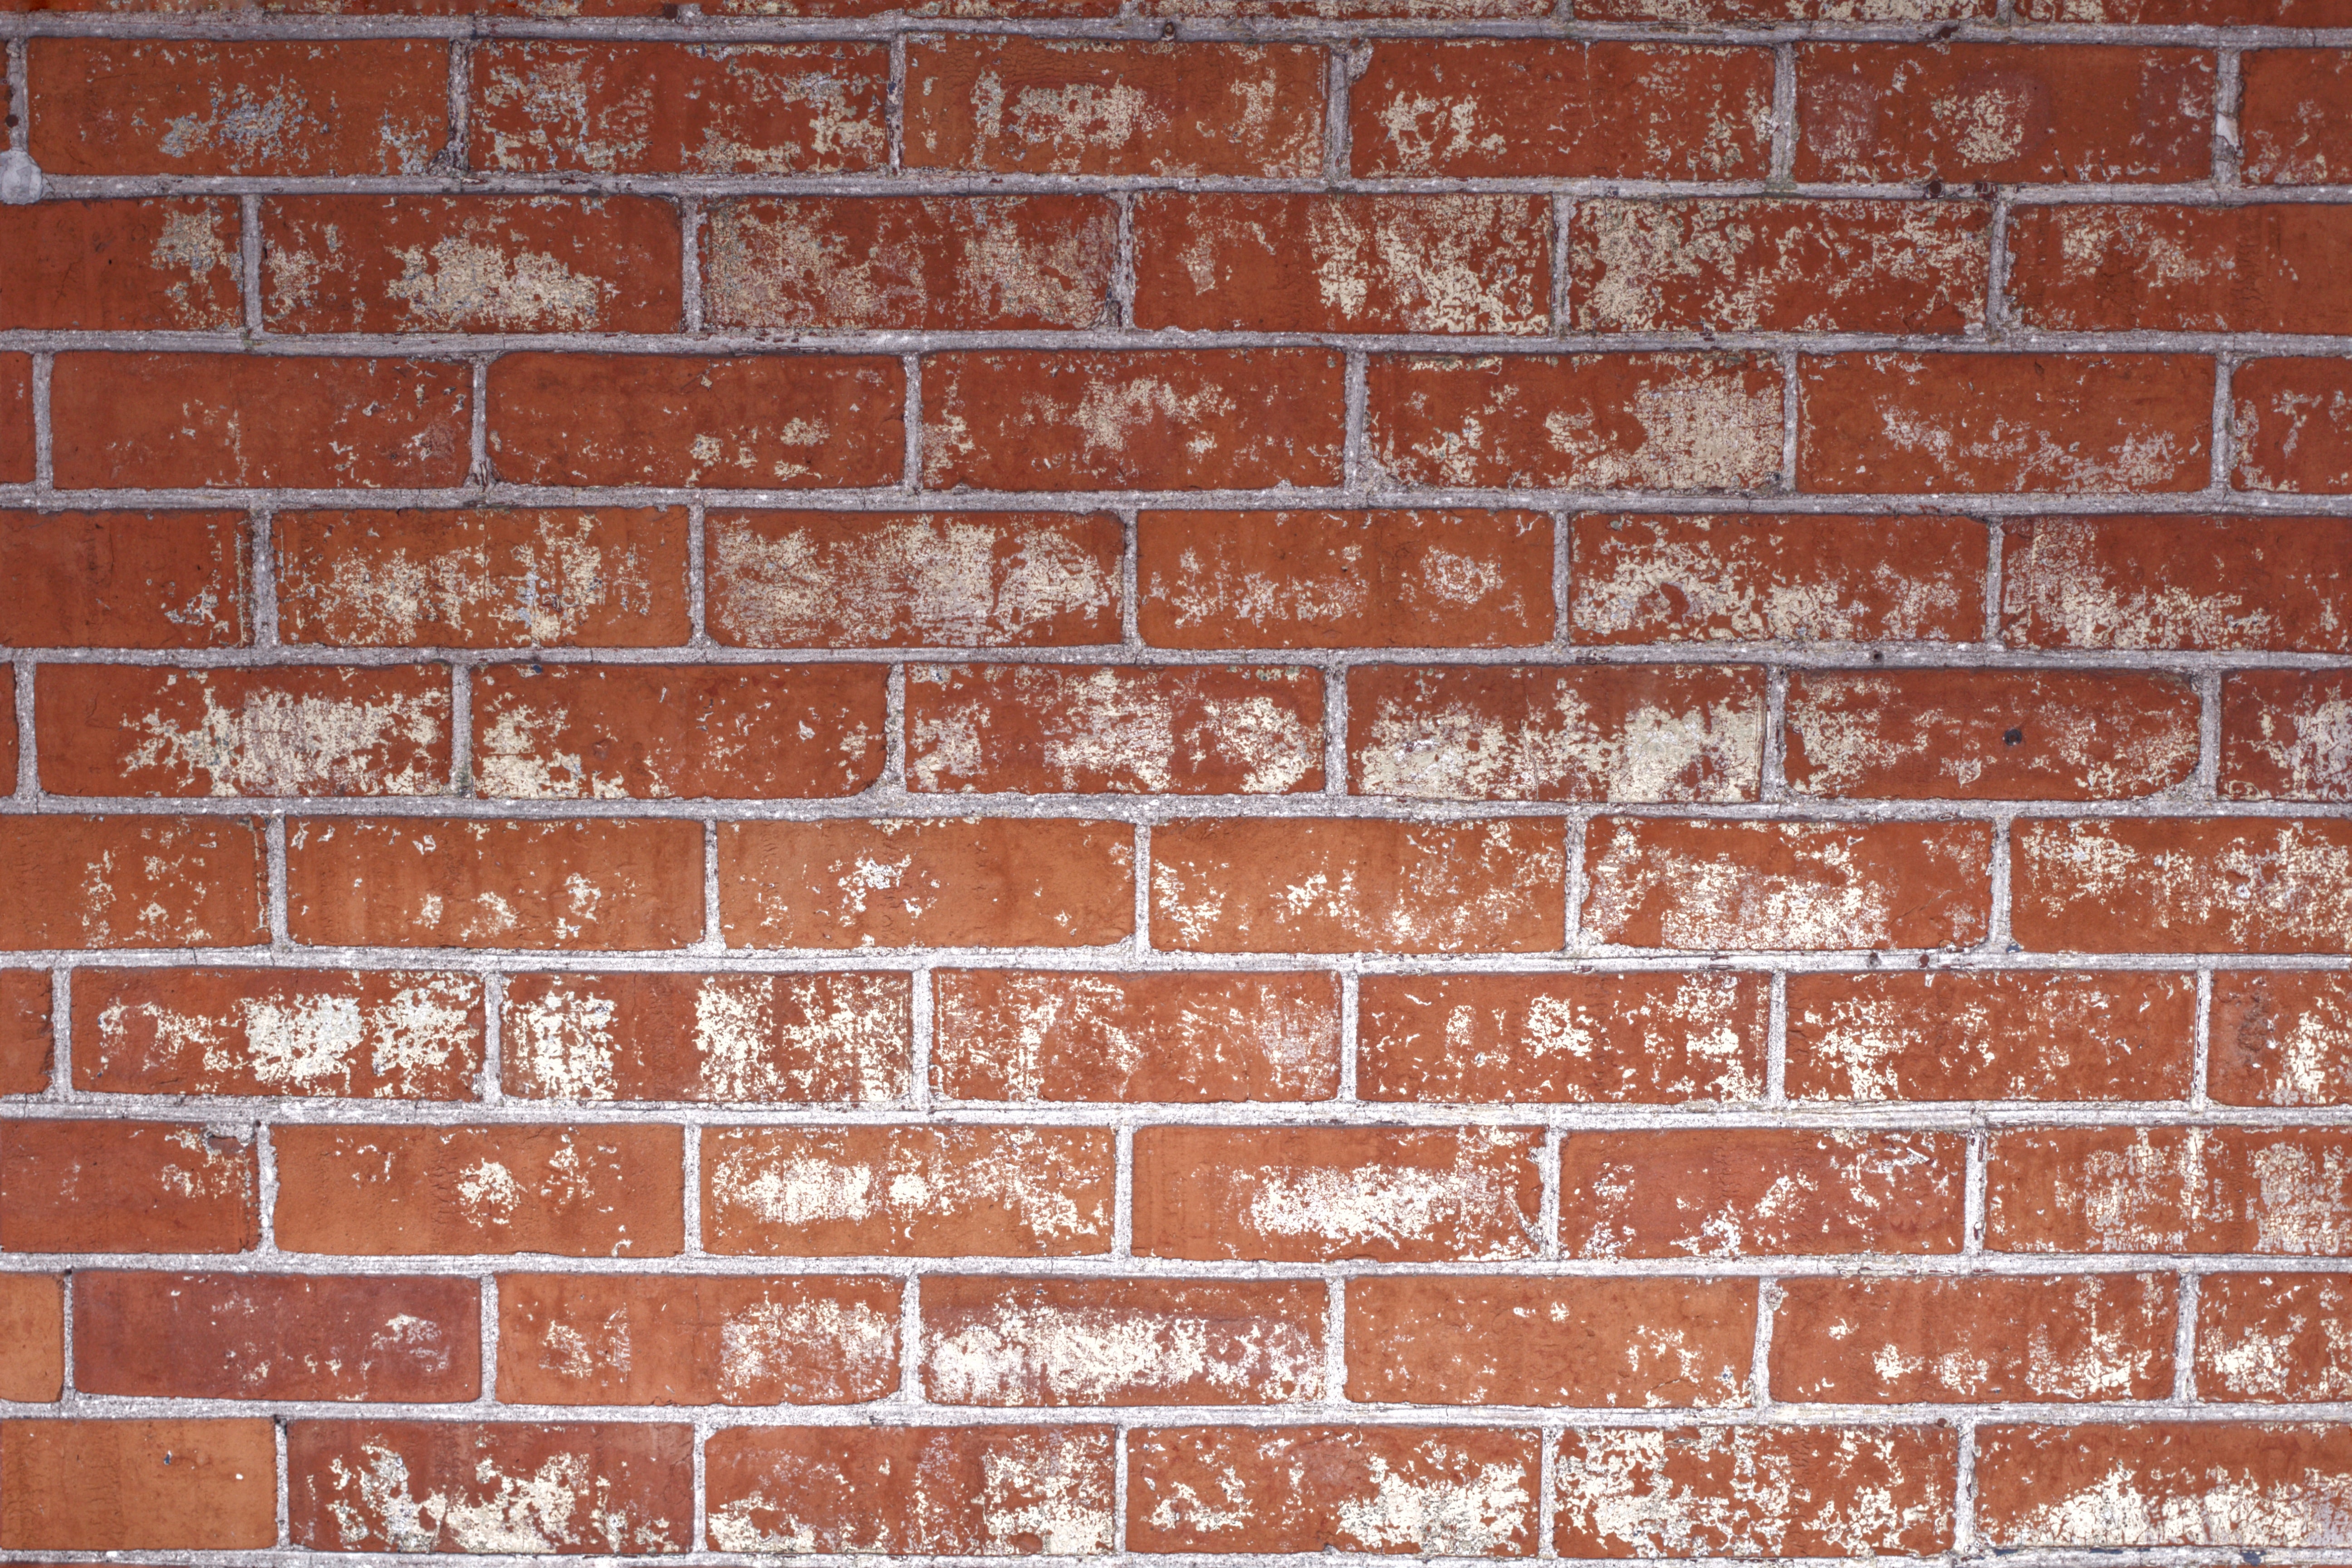 32k Wallpaper Wall brick, stains, textures, spots